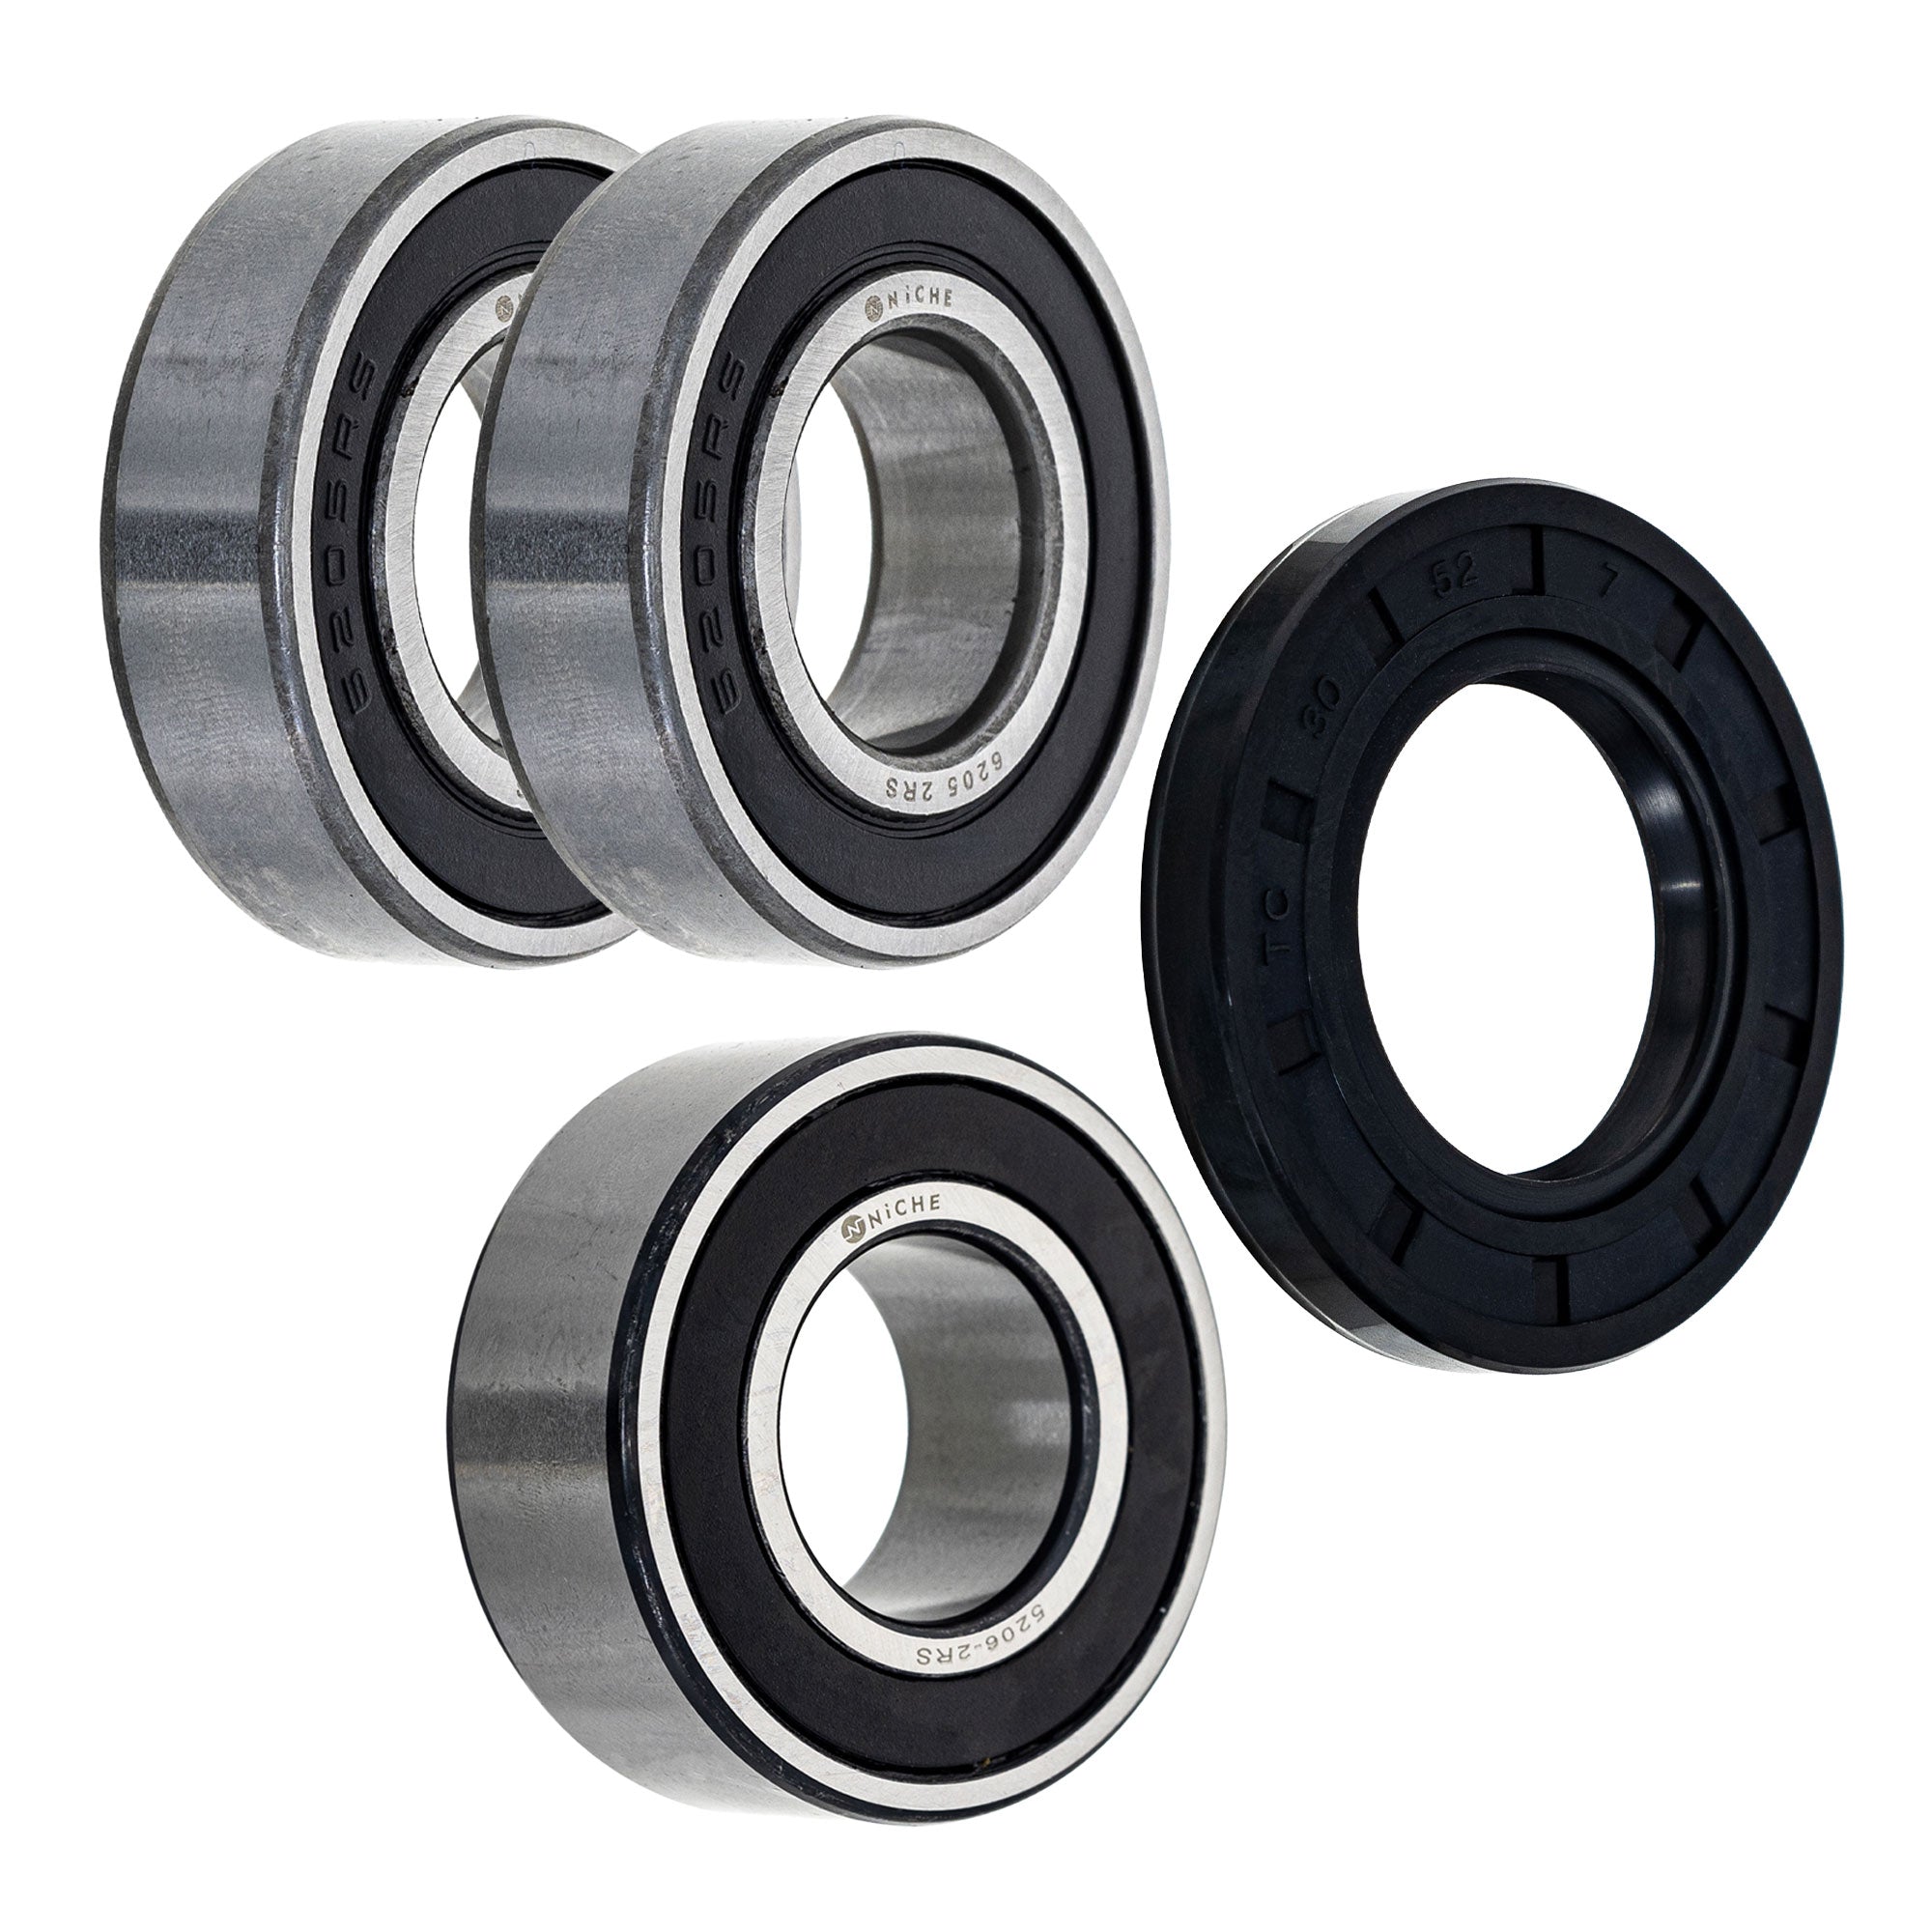 Wheel Bearing Seal Kit for zOTHER Ref No 950 NICHE MK1009017